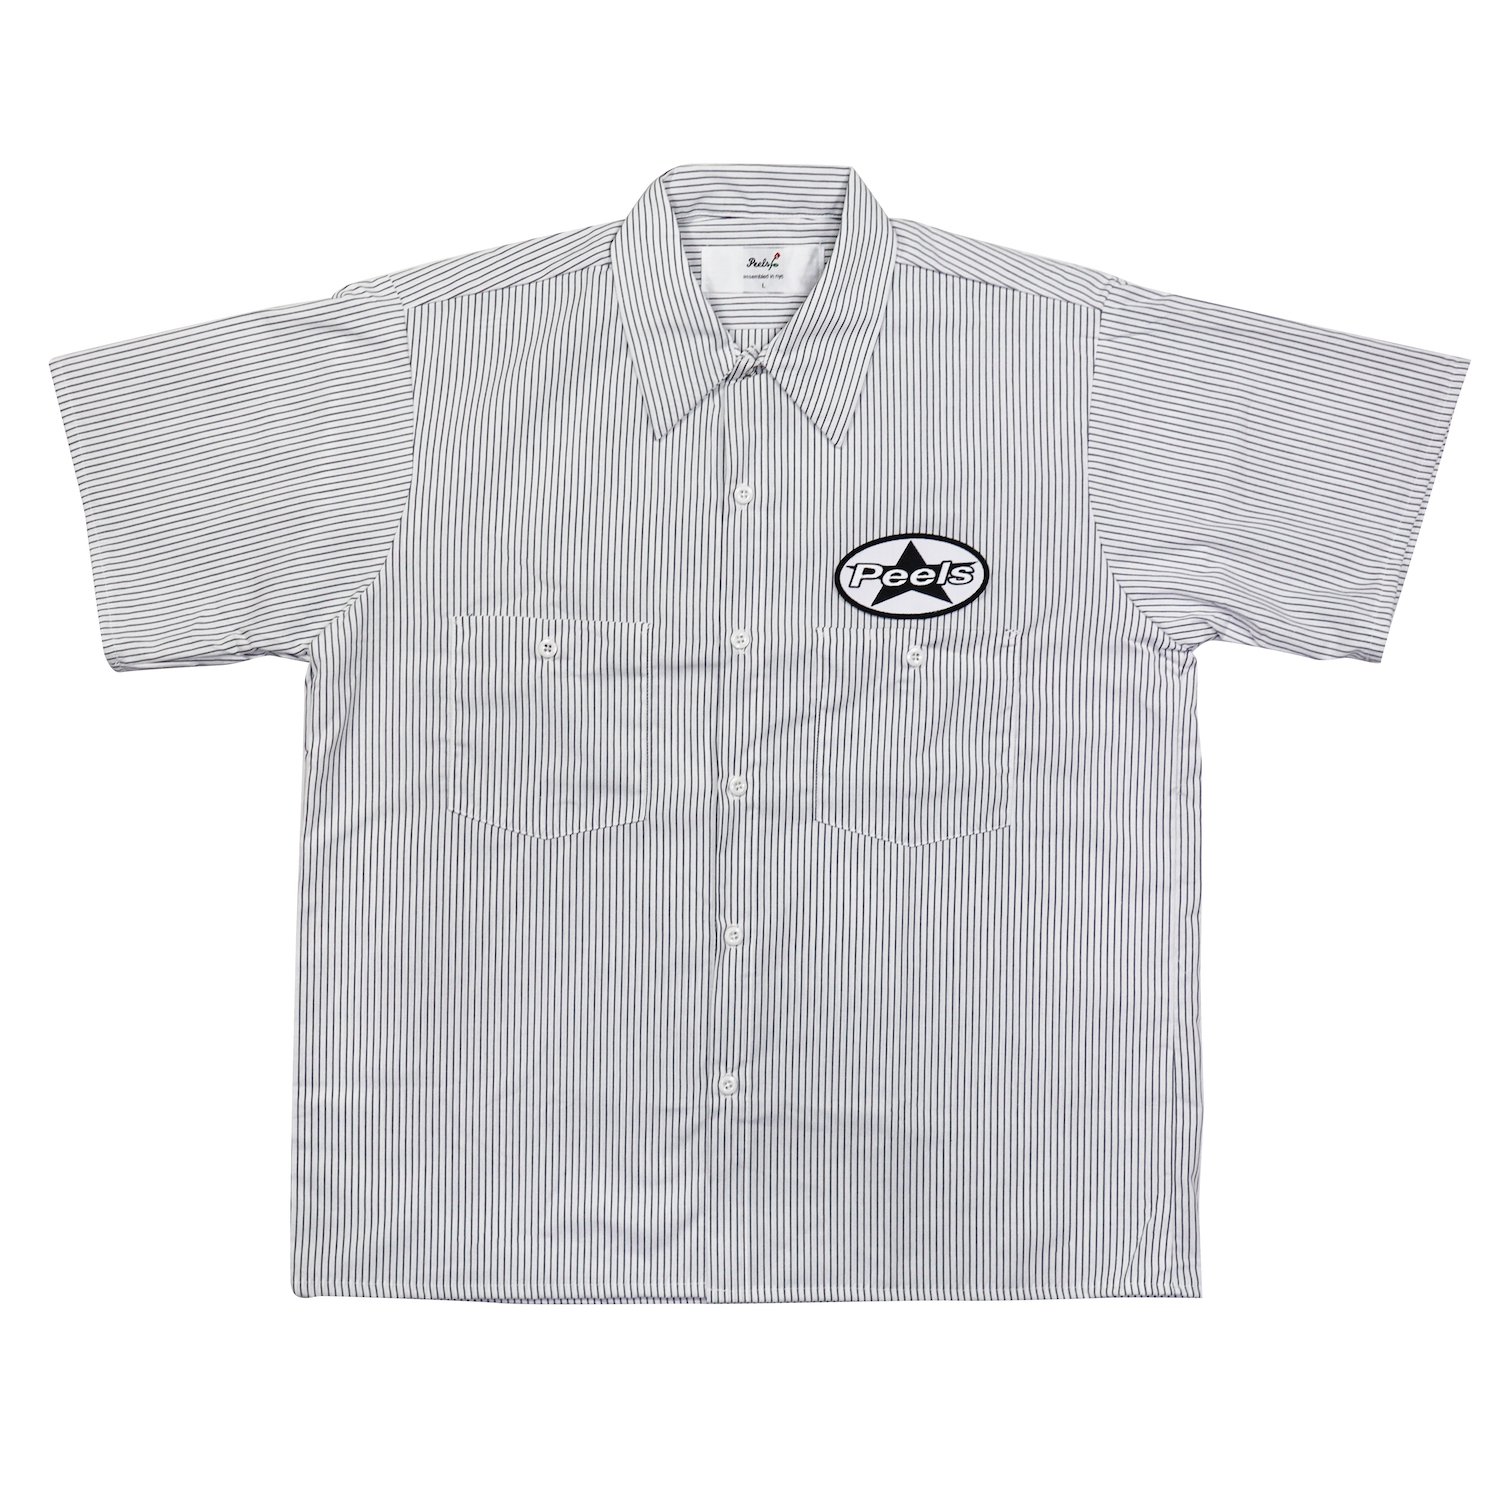 Peels<br>OG Striped Work Shirt with Star Patch<br>